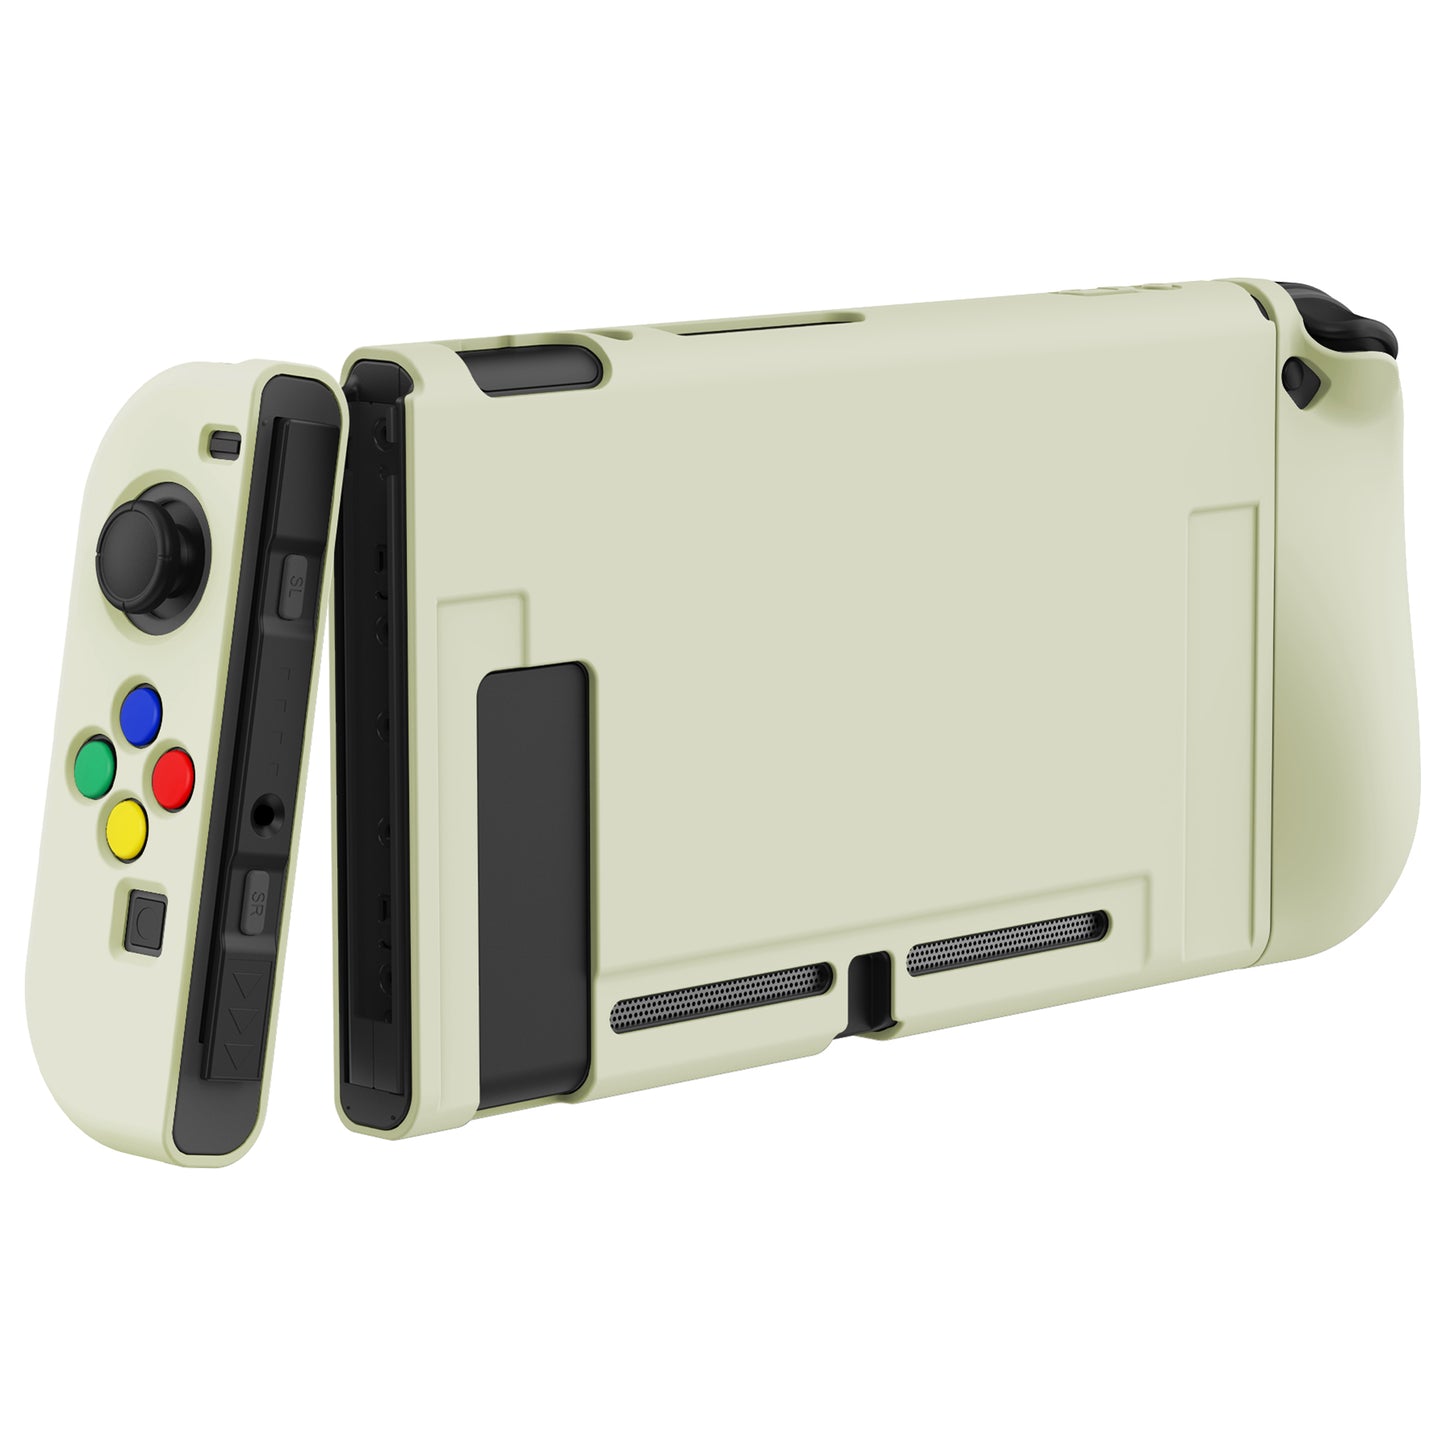 PlayVital Antique Yellow Protective Case for NS Switch, Soft TPU Slim Case Cover for NS Switch Joy-Con Console with Colorful ABXY Direction Button Caps - NTU6033G2 PlayVital